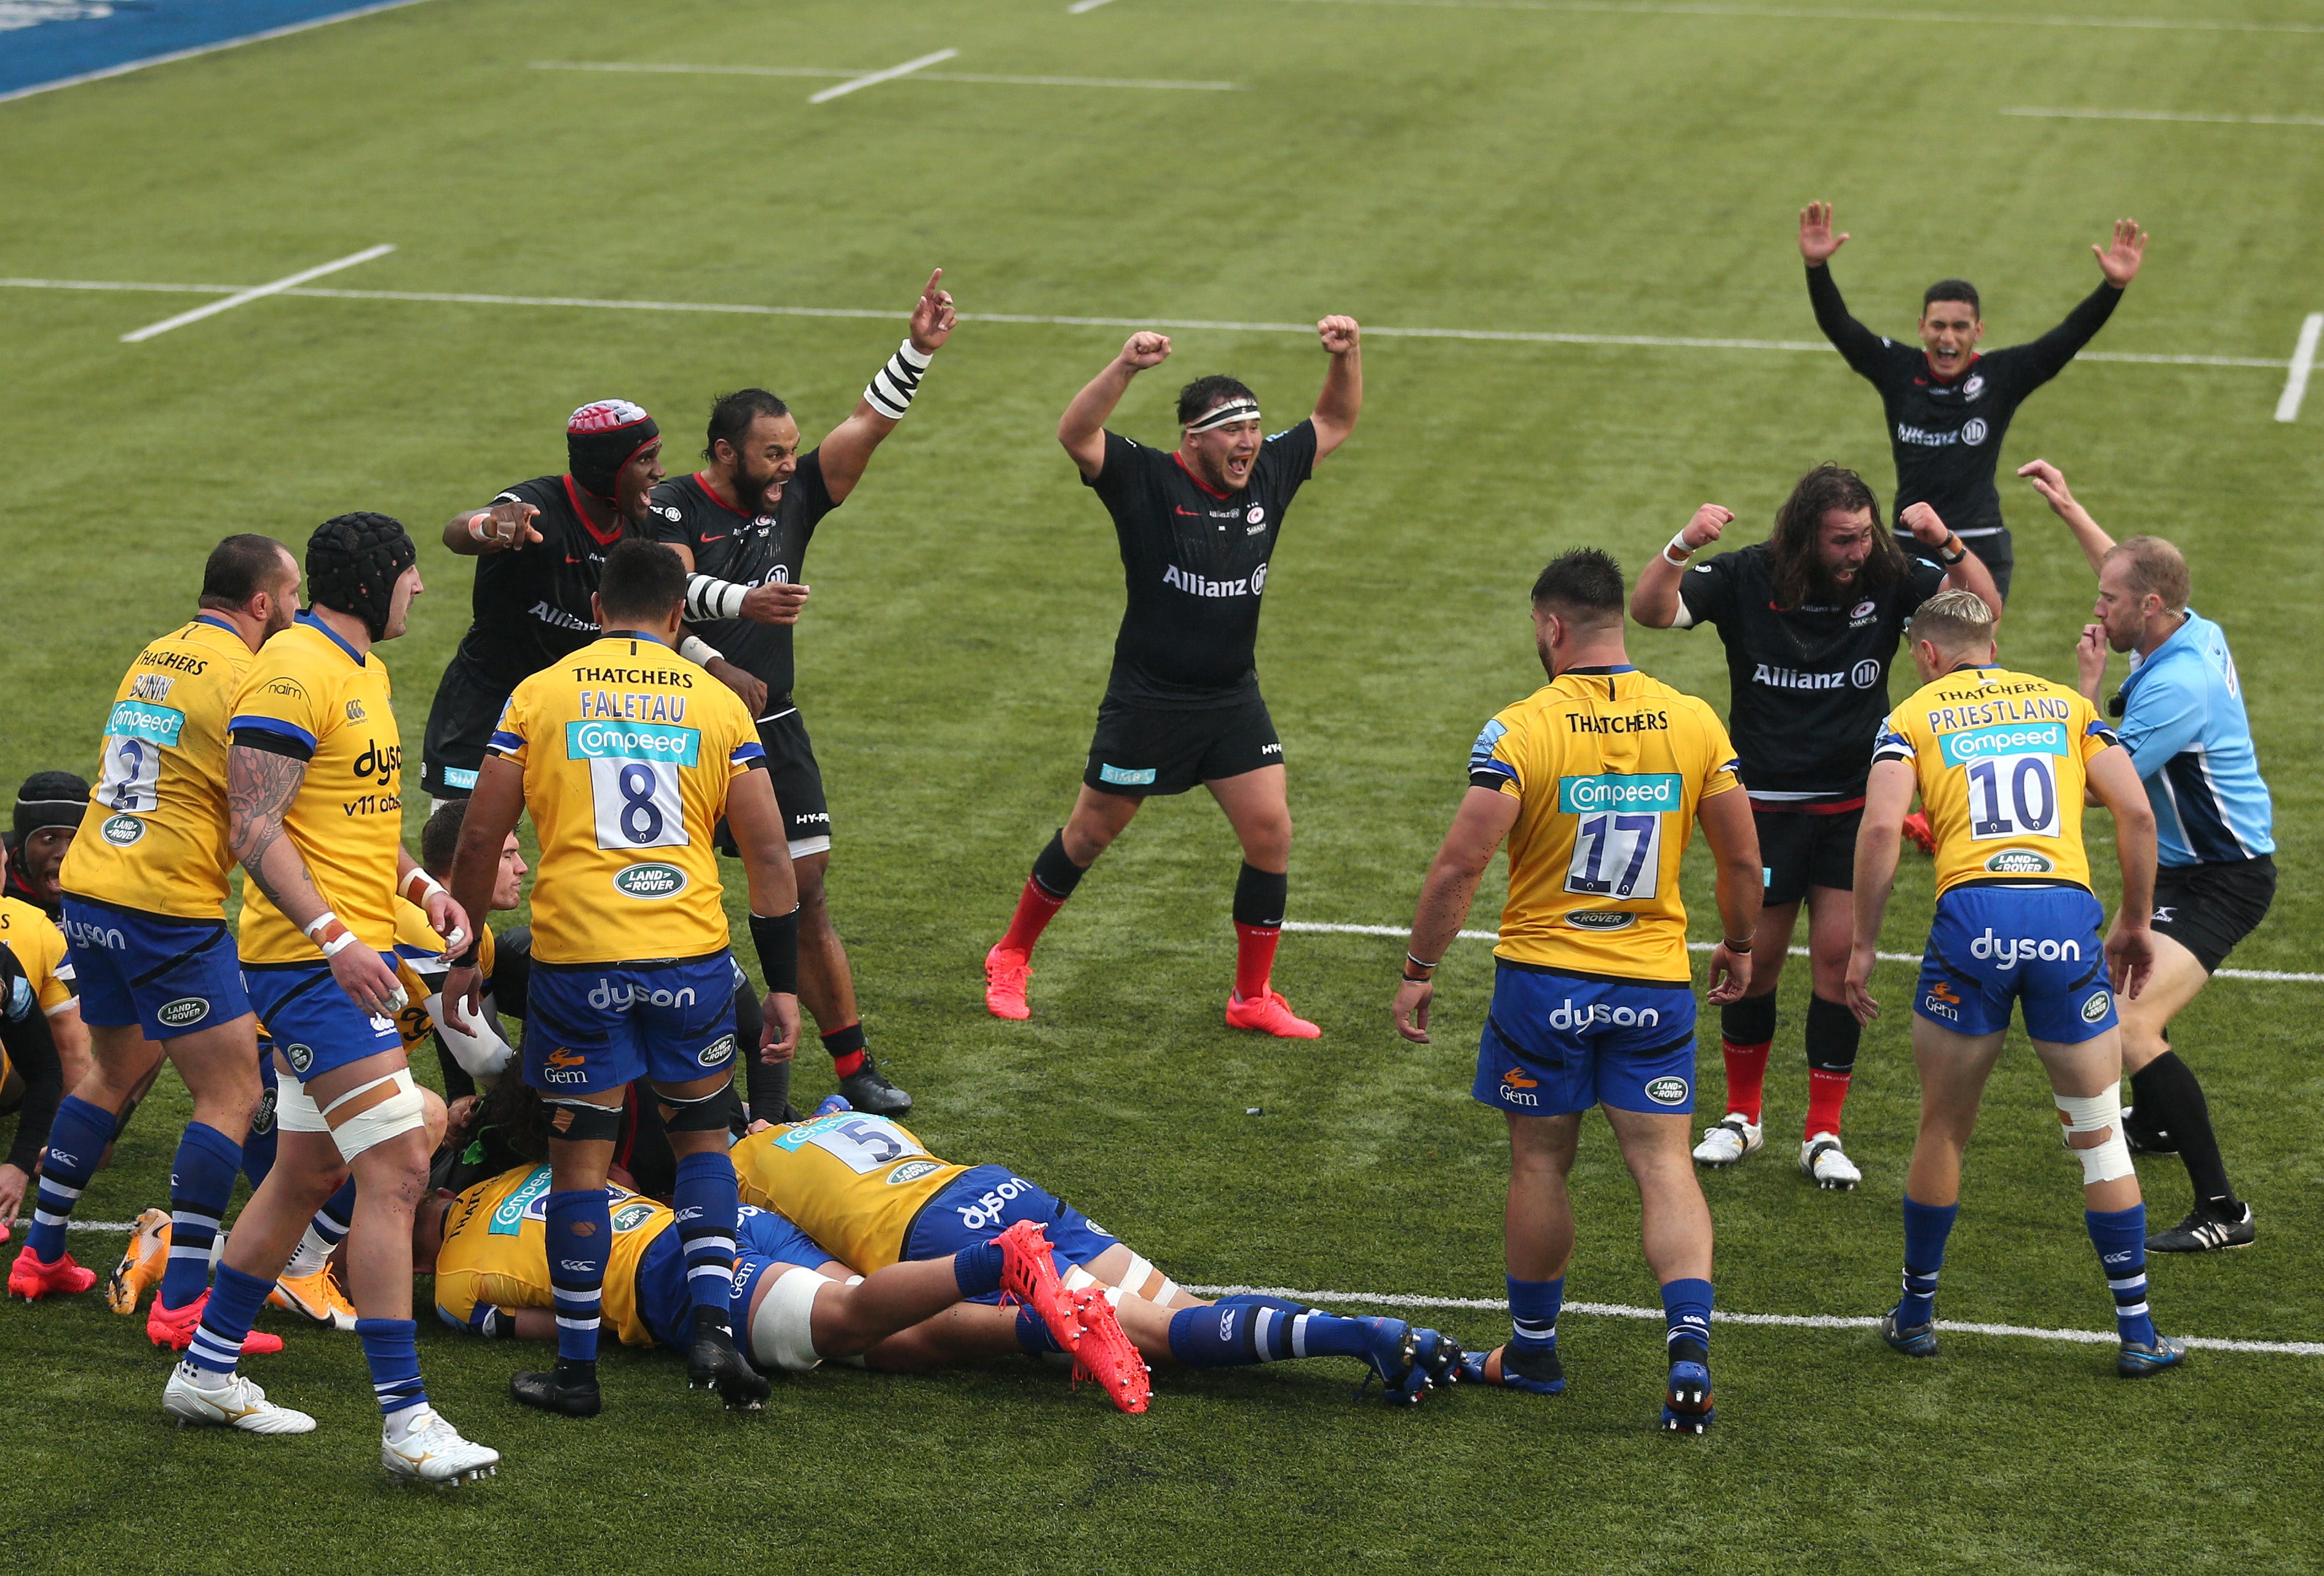 Saracens scored a late try to potentially cost Bath their place in the Premiership semi-finals